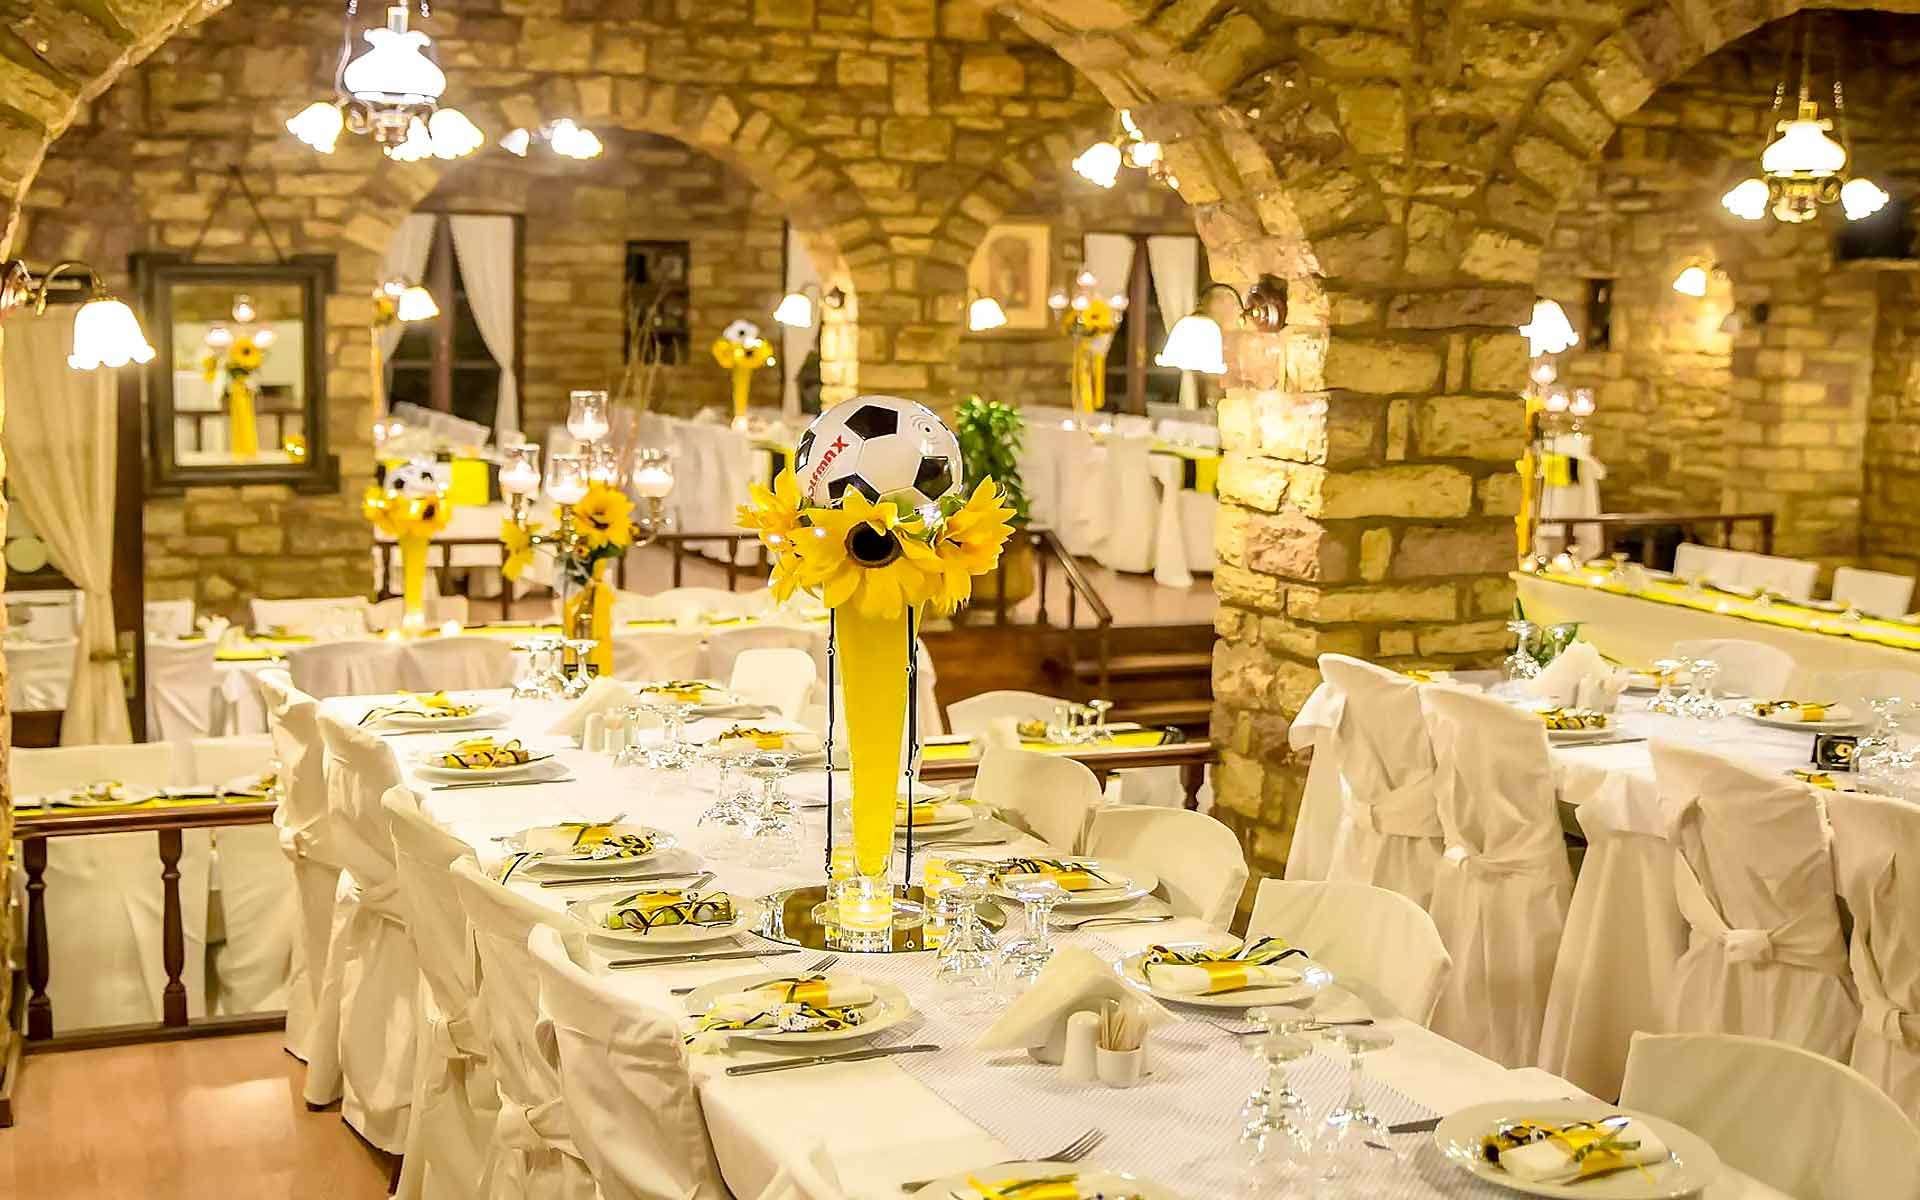 Unique-Baptism-Party-Idea-With-Yellow-And-Black-Colors-And-A-Ball-As-A-Centerpiece-In-A-Tall-Vase